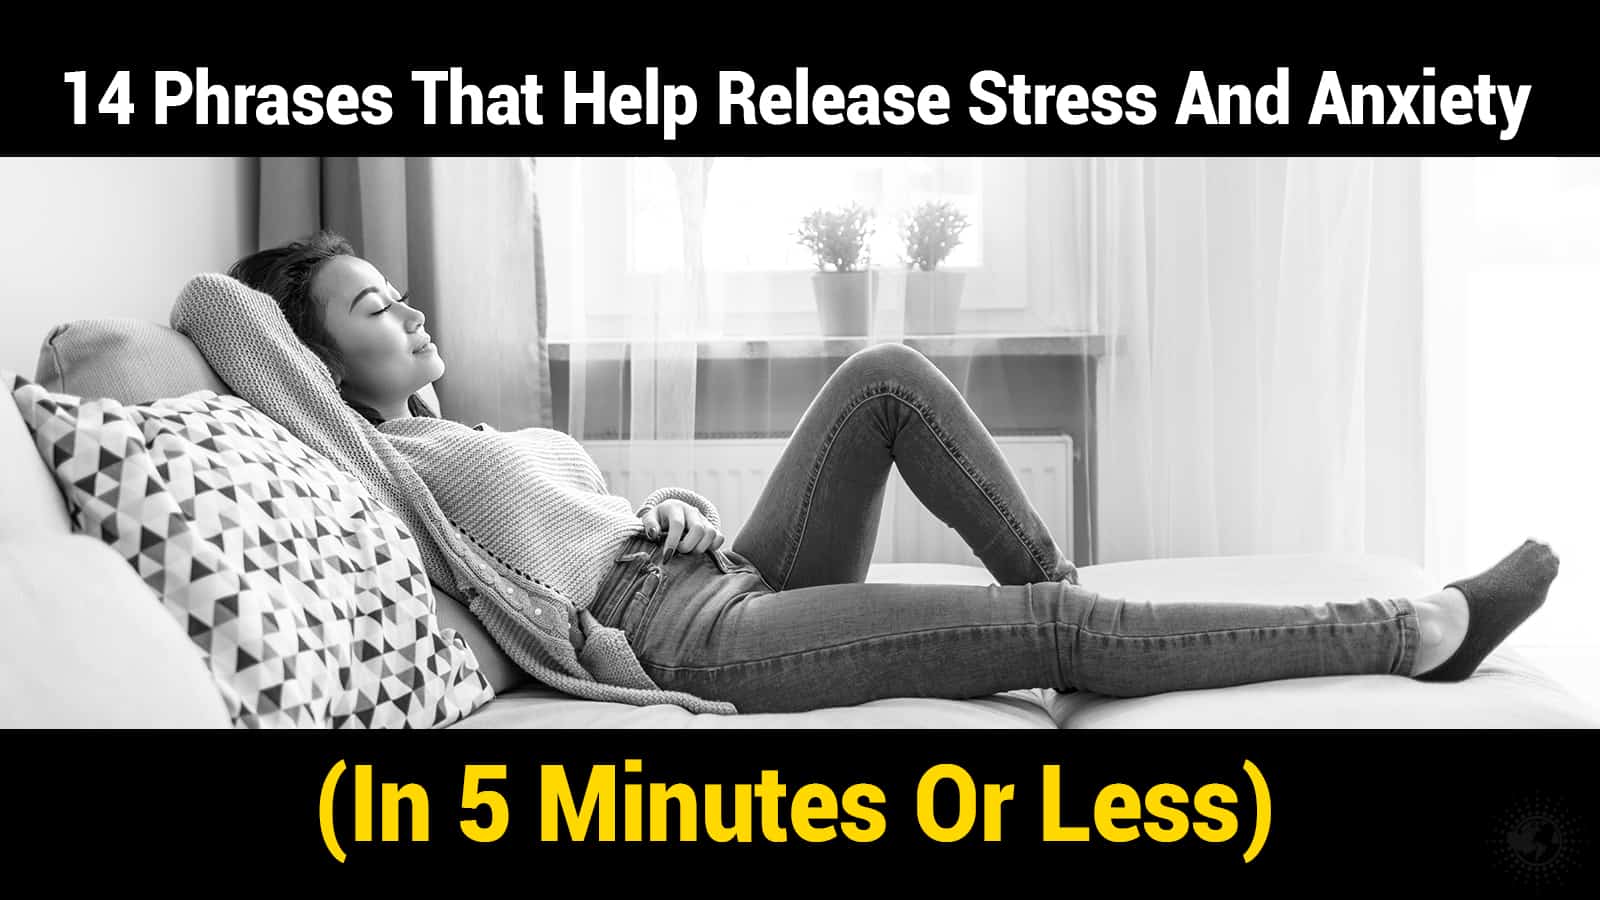 14 Phrases That Help Release Stress And Anxiety (In 5 Minutes Or Less)